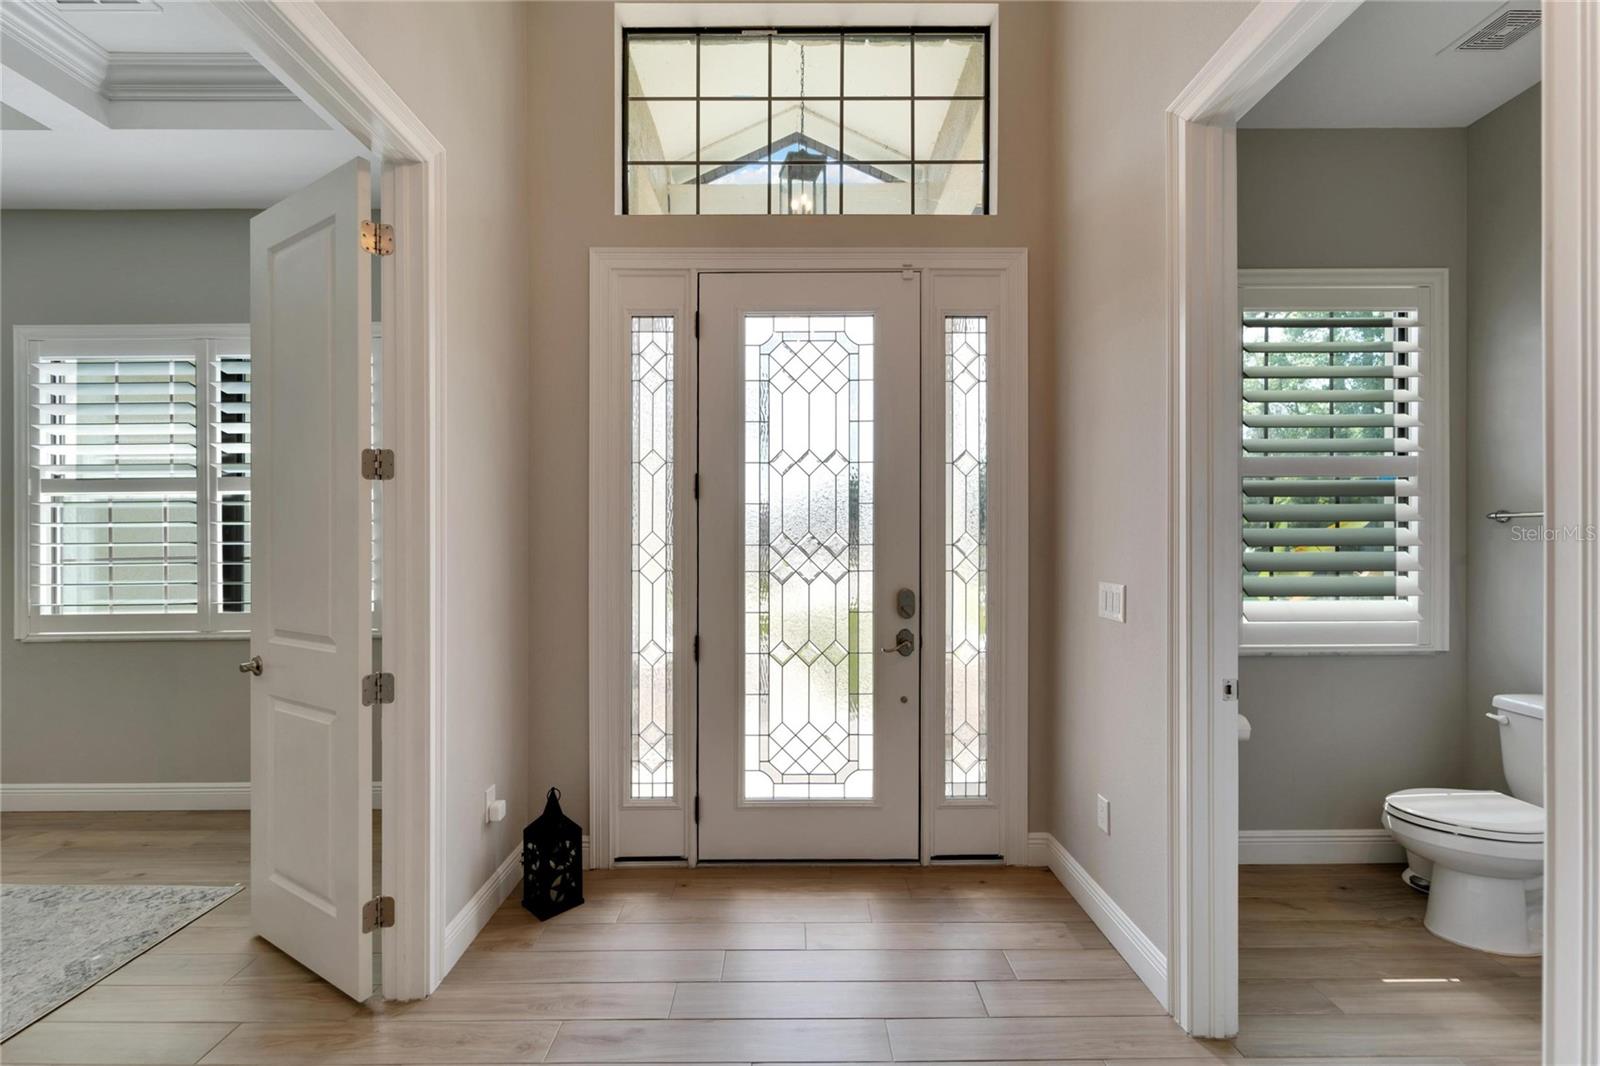 Step into spacious splendor with this grand foyer, the perfect welcome to luxurious living.